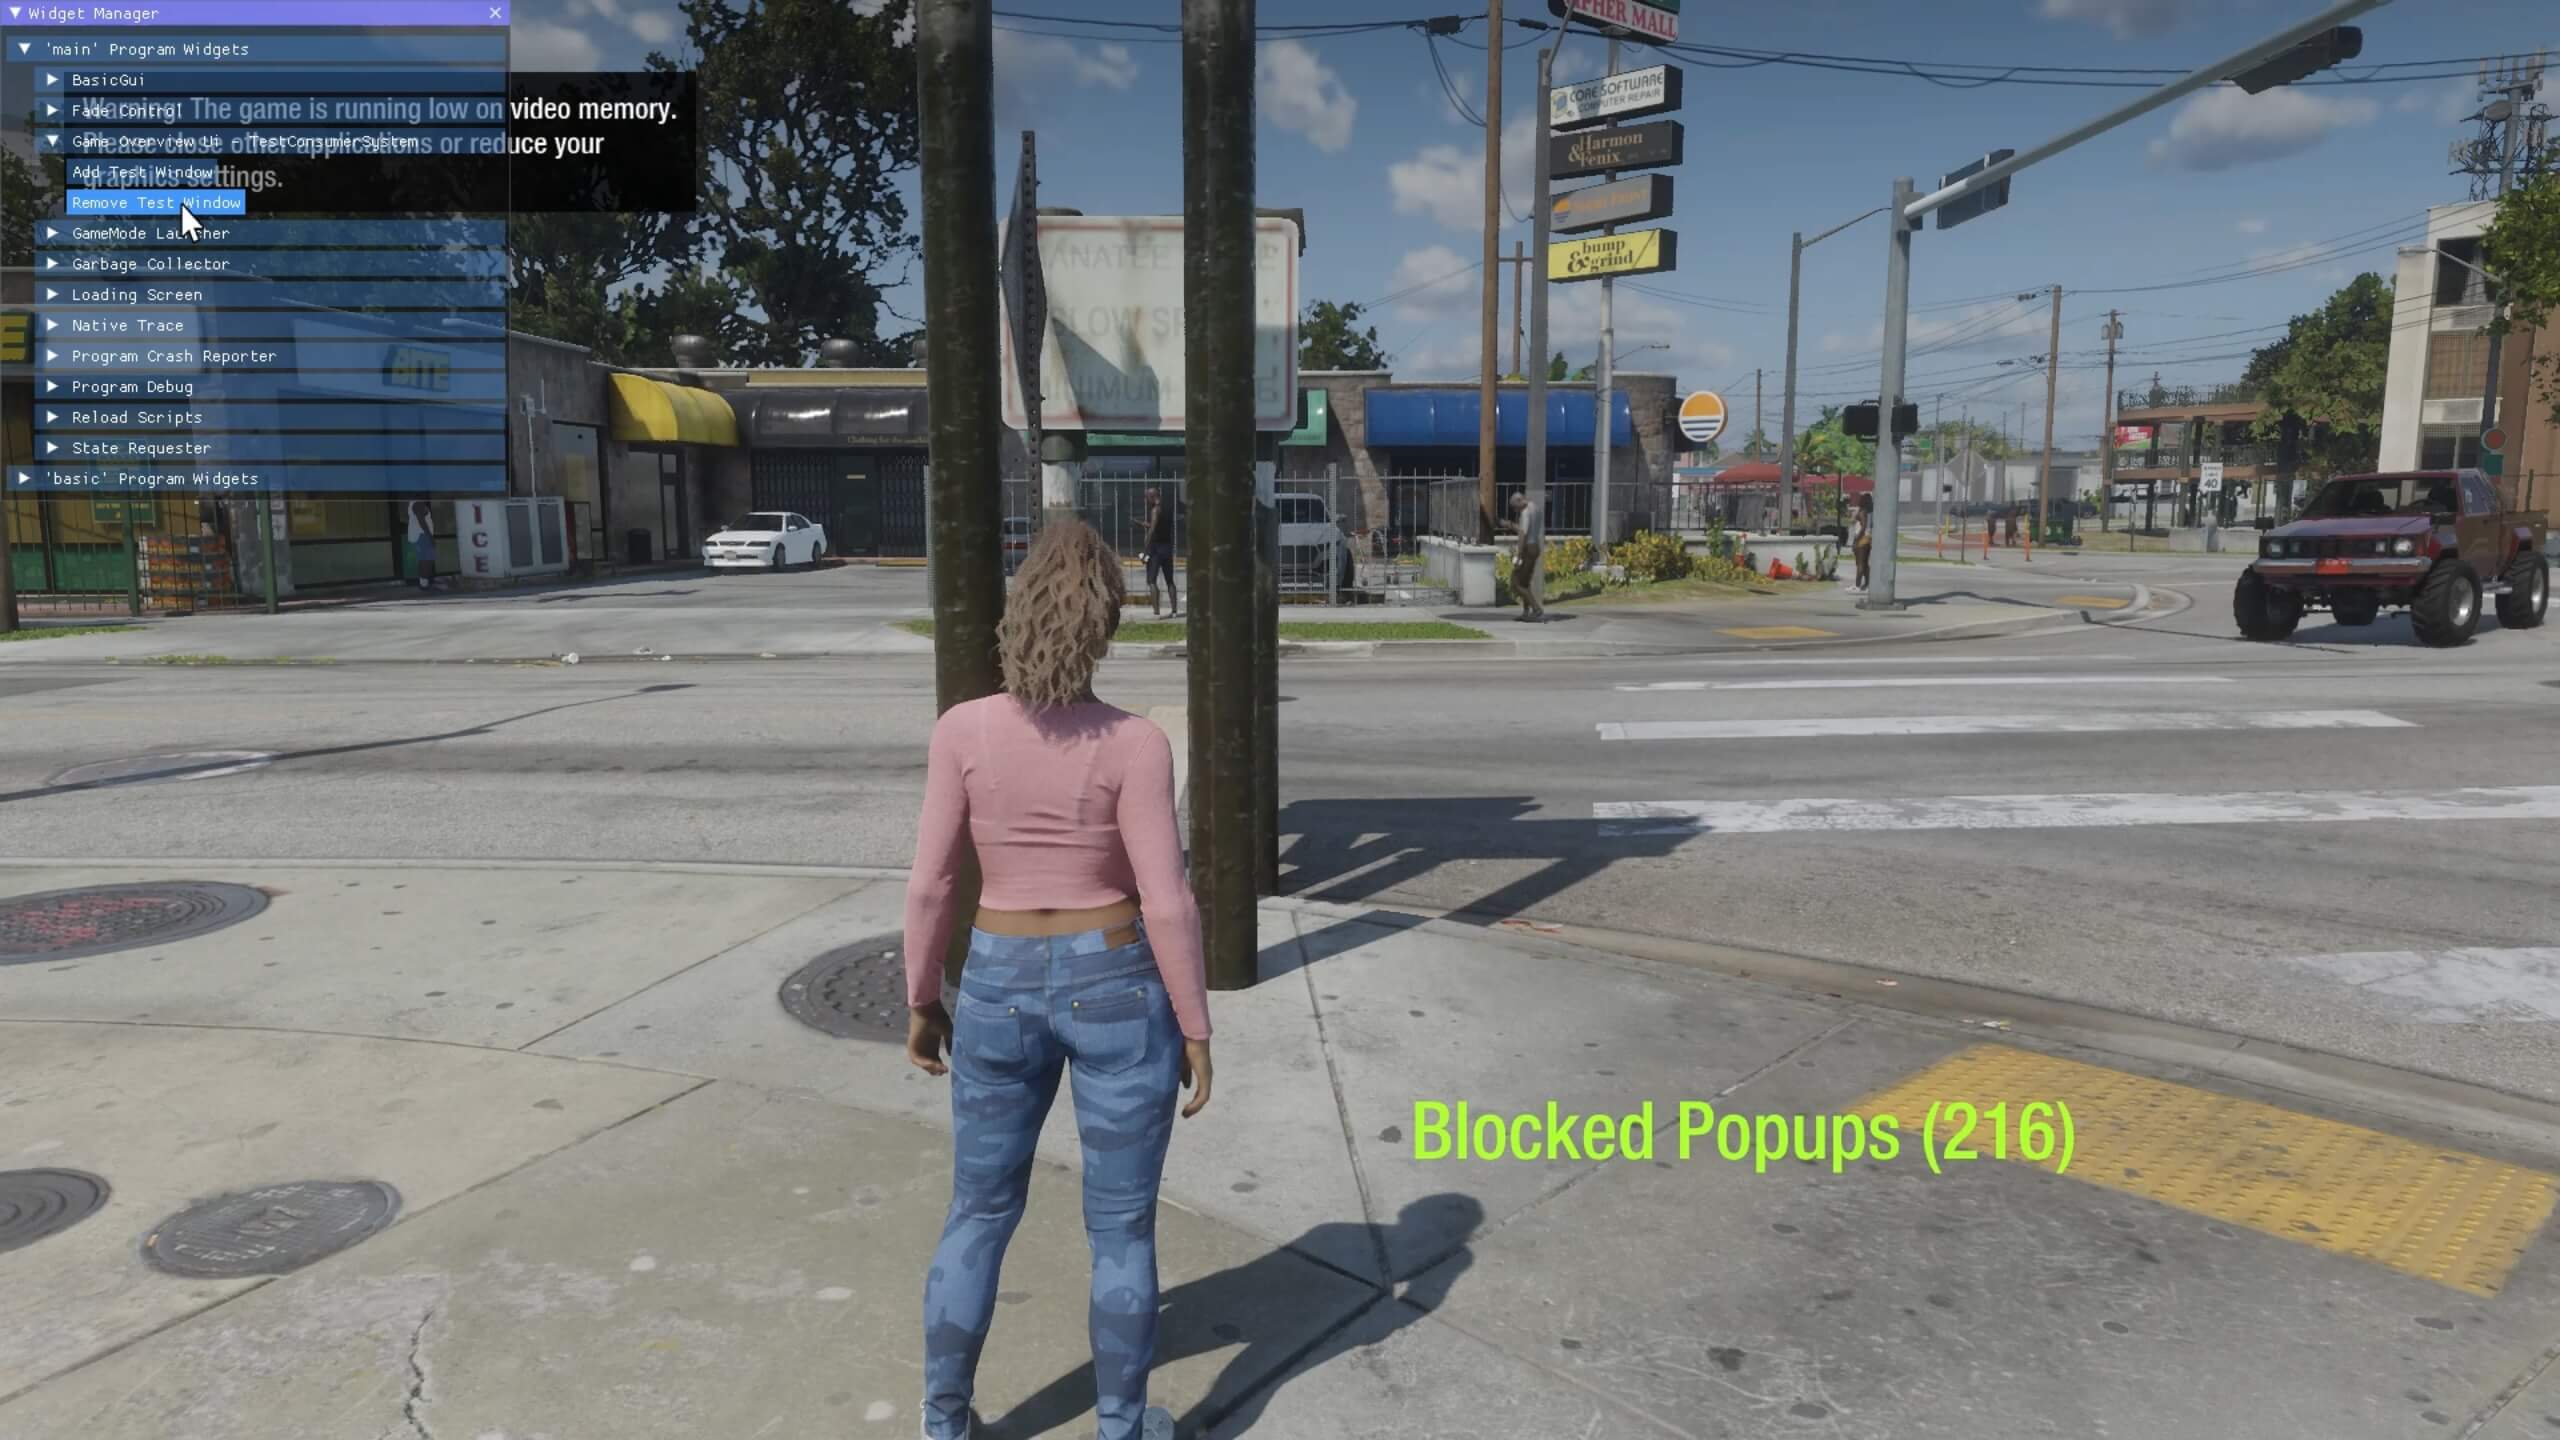 GTA 6 leaked footage WATCH BEFORE IT GETS DELETED